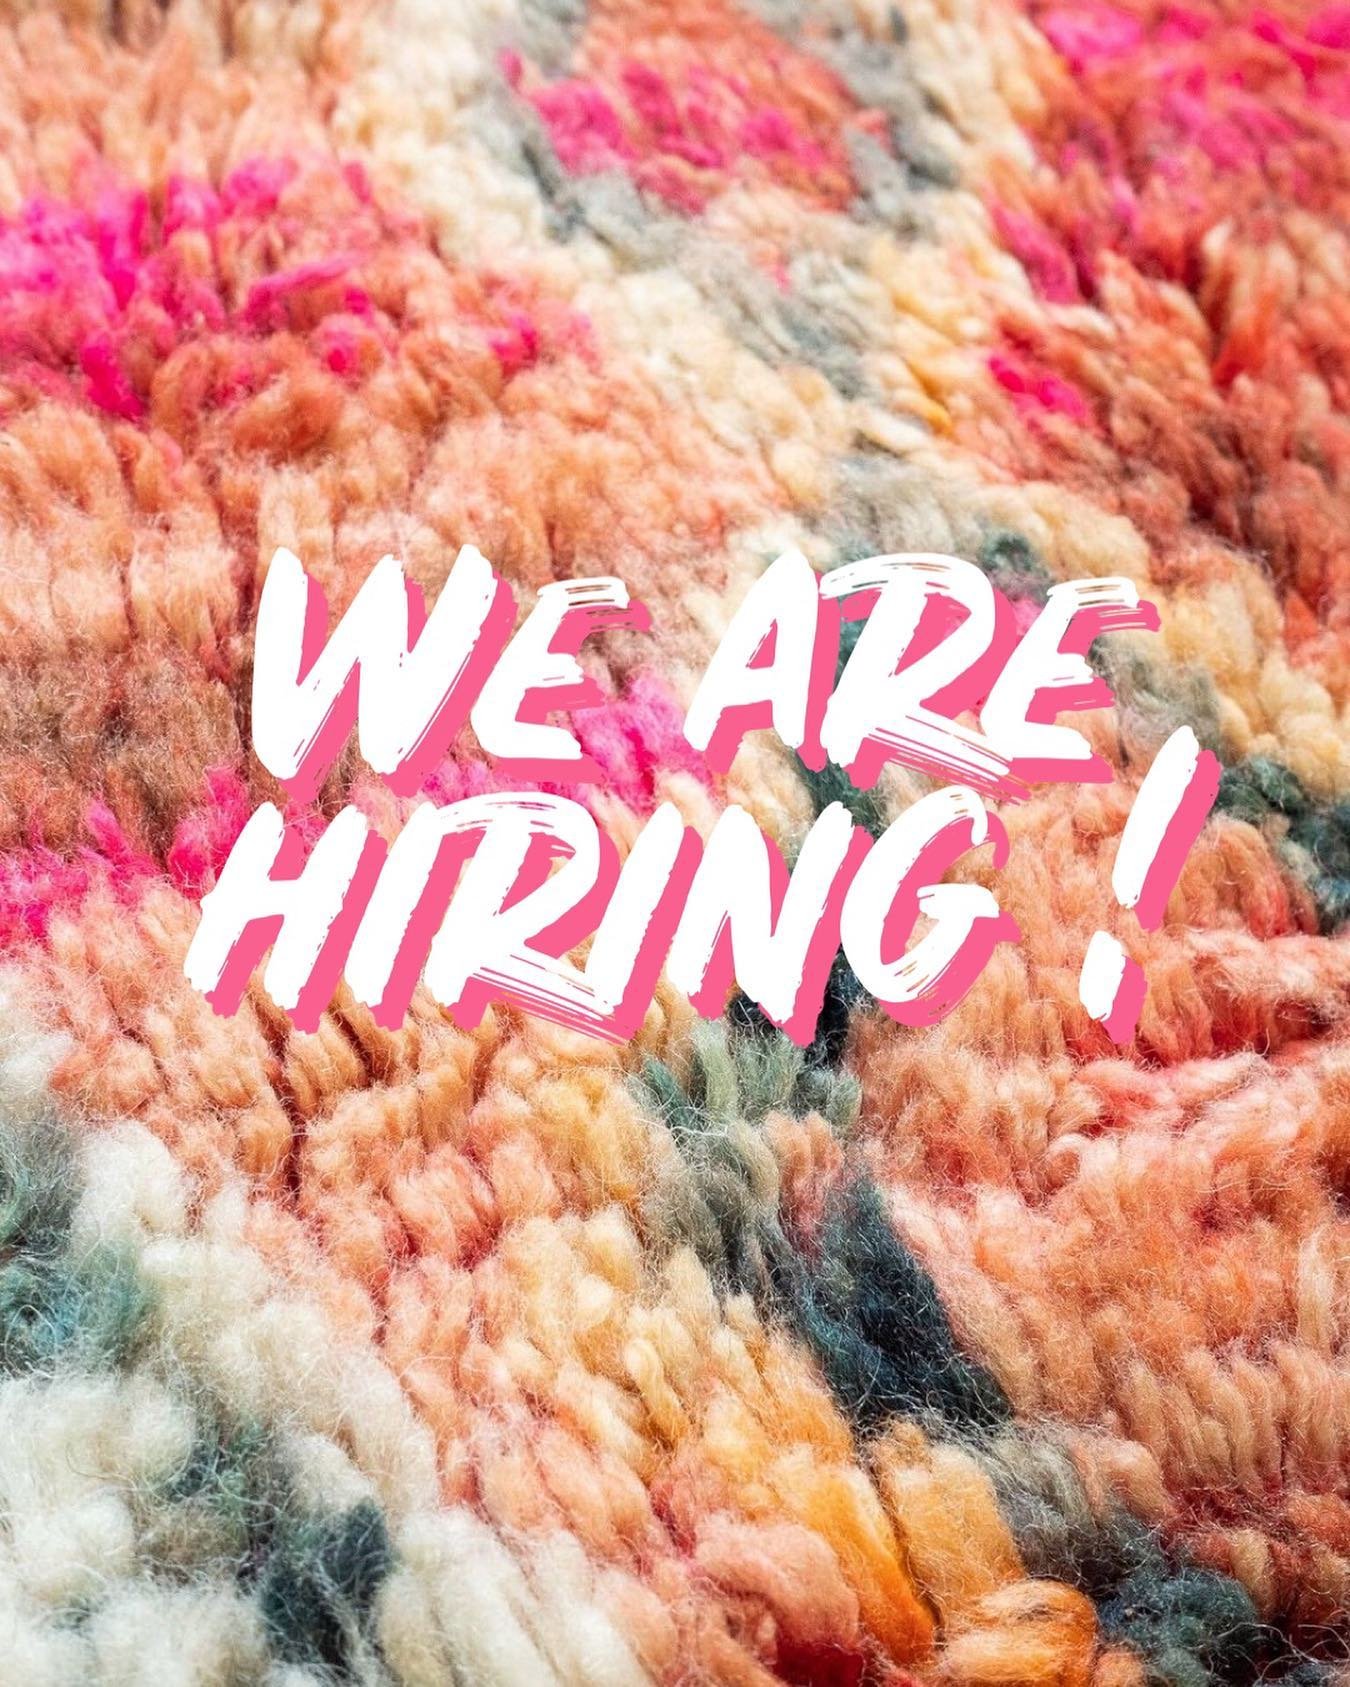 **🌟 We&rsquo;re Hiring: Freelance Customer Service Rep at &Auml;ventyr! 🌟**

Join our team to celebrate the craftsmanship of handmade rugs and unique items from Morocco and beyond! We&rsquo;re looking for a passionate Freelance Customer Service Rep